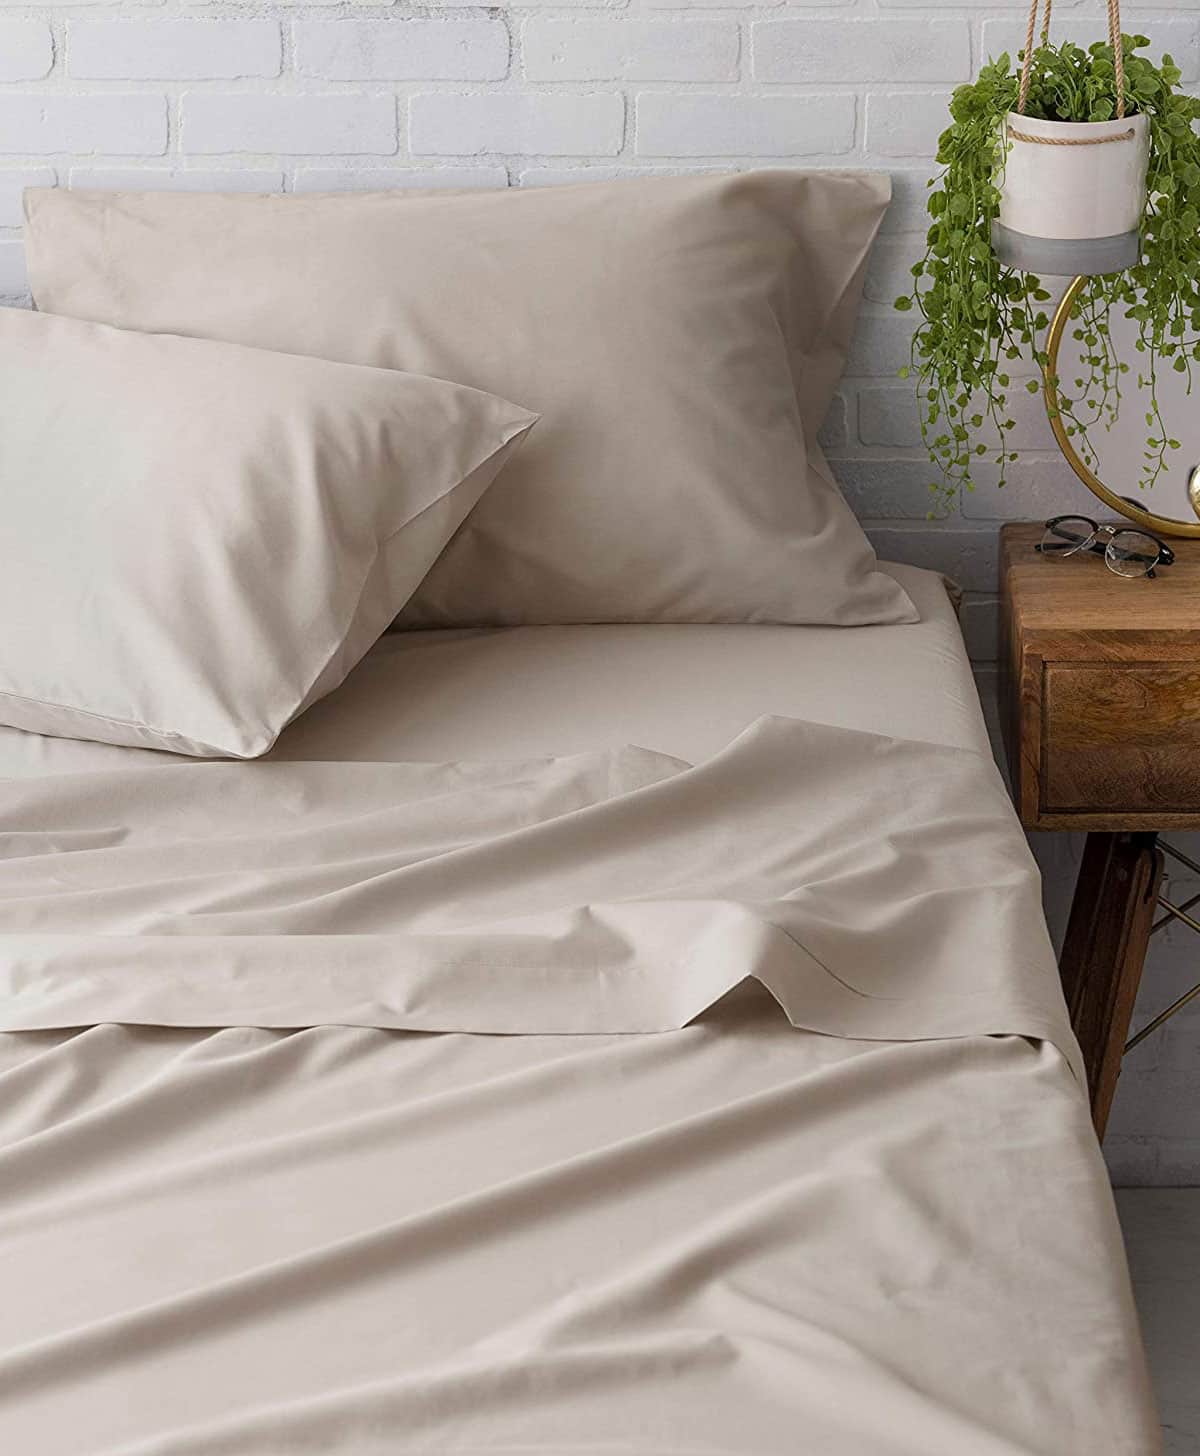 Best Sustainable Bedding - Ultimate Guide To The 9 Best Sheets